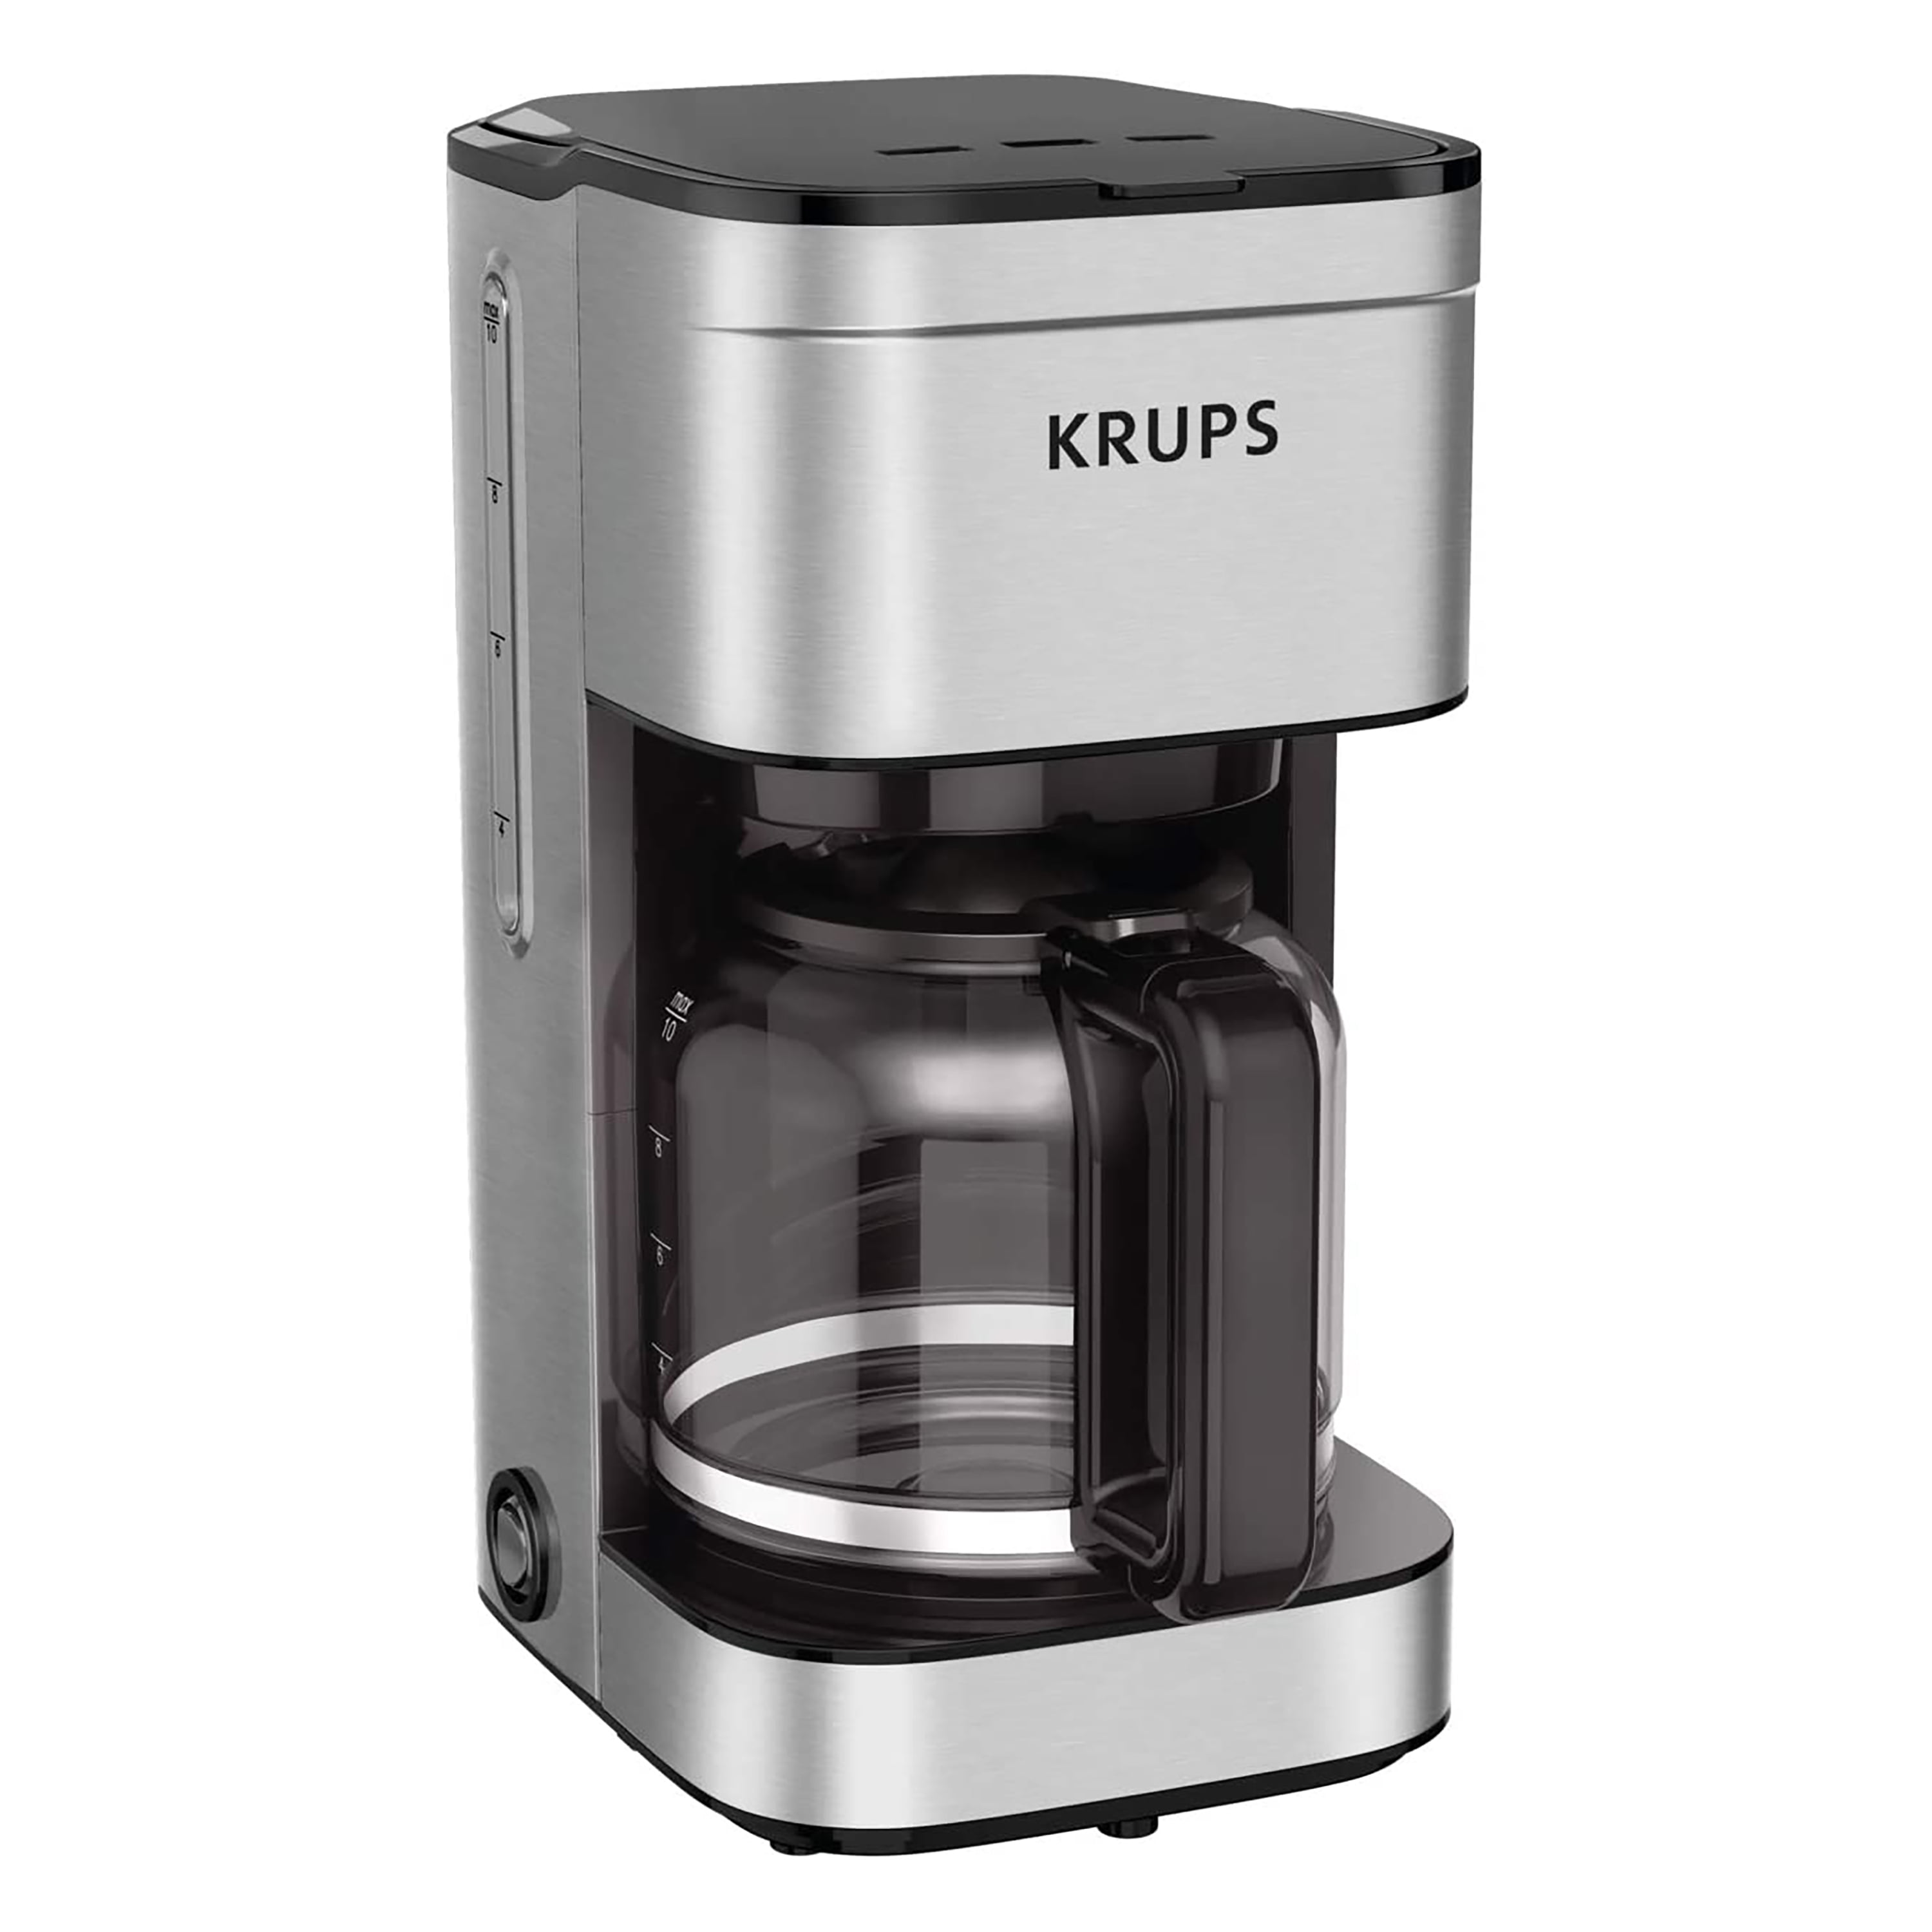 Krups ProCafe 321 - White Ten (10) Cup Coffee Maker for sale online